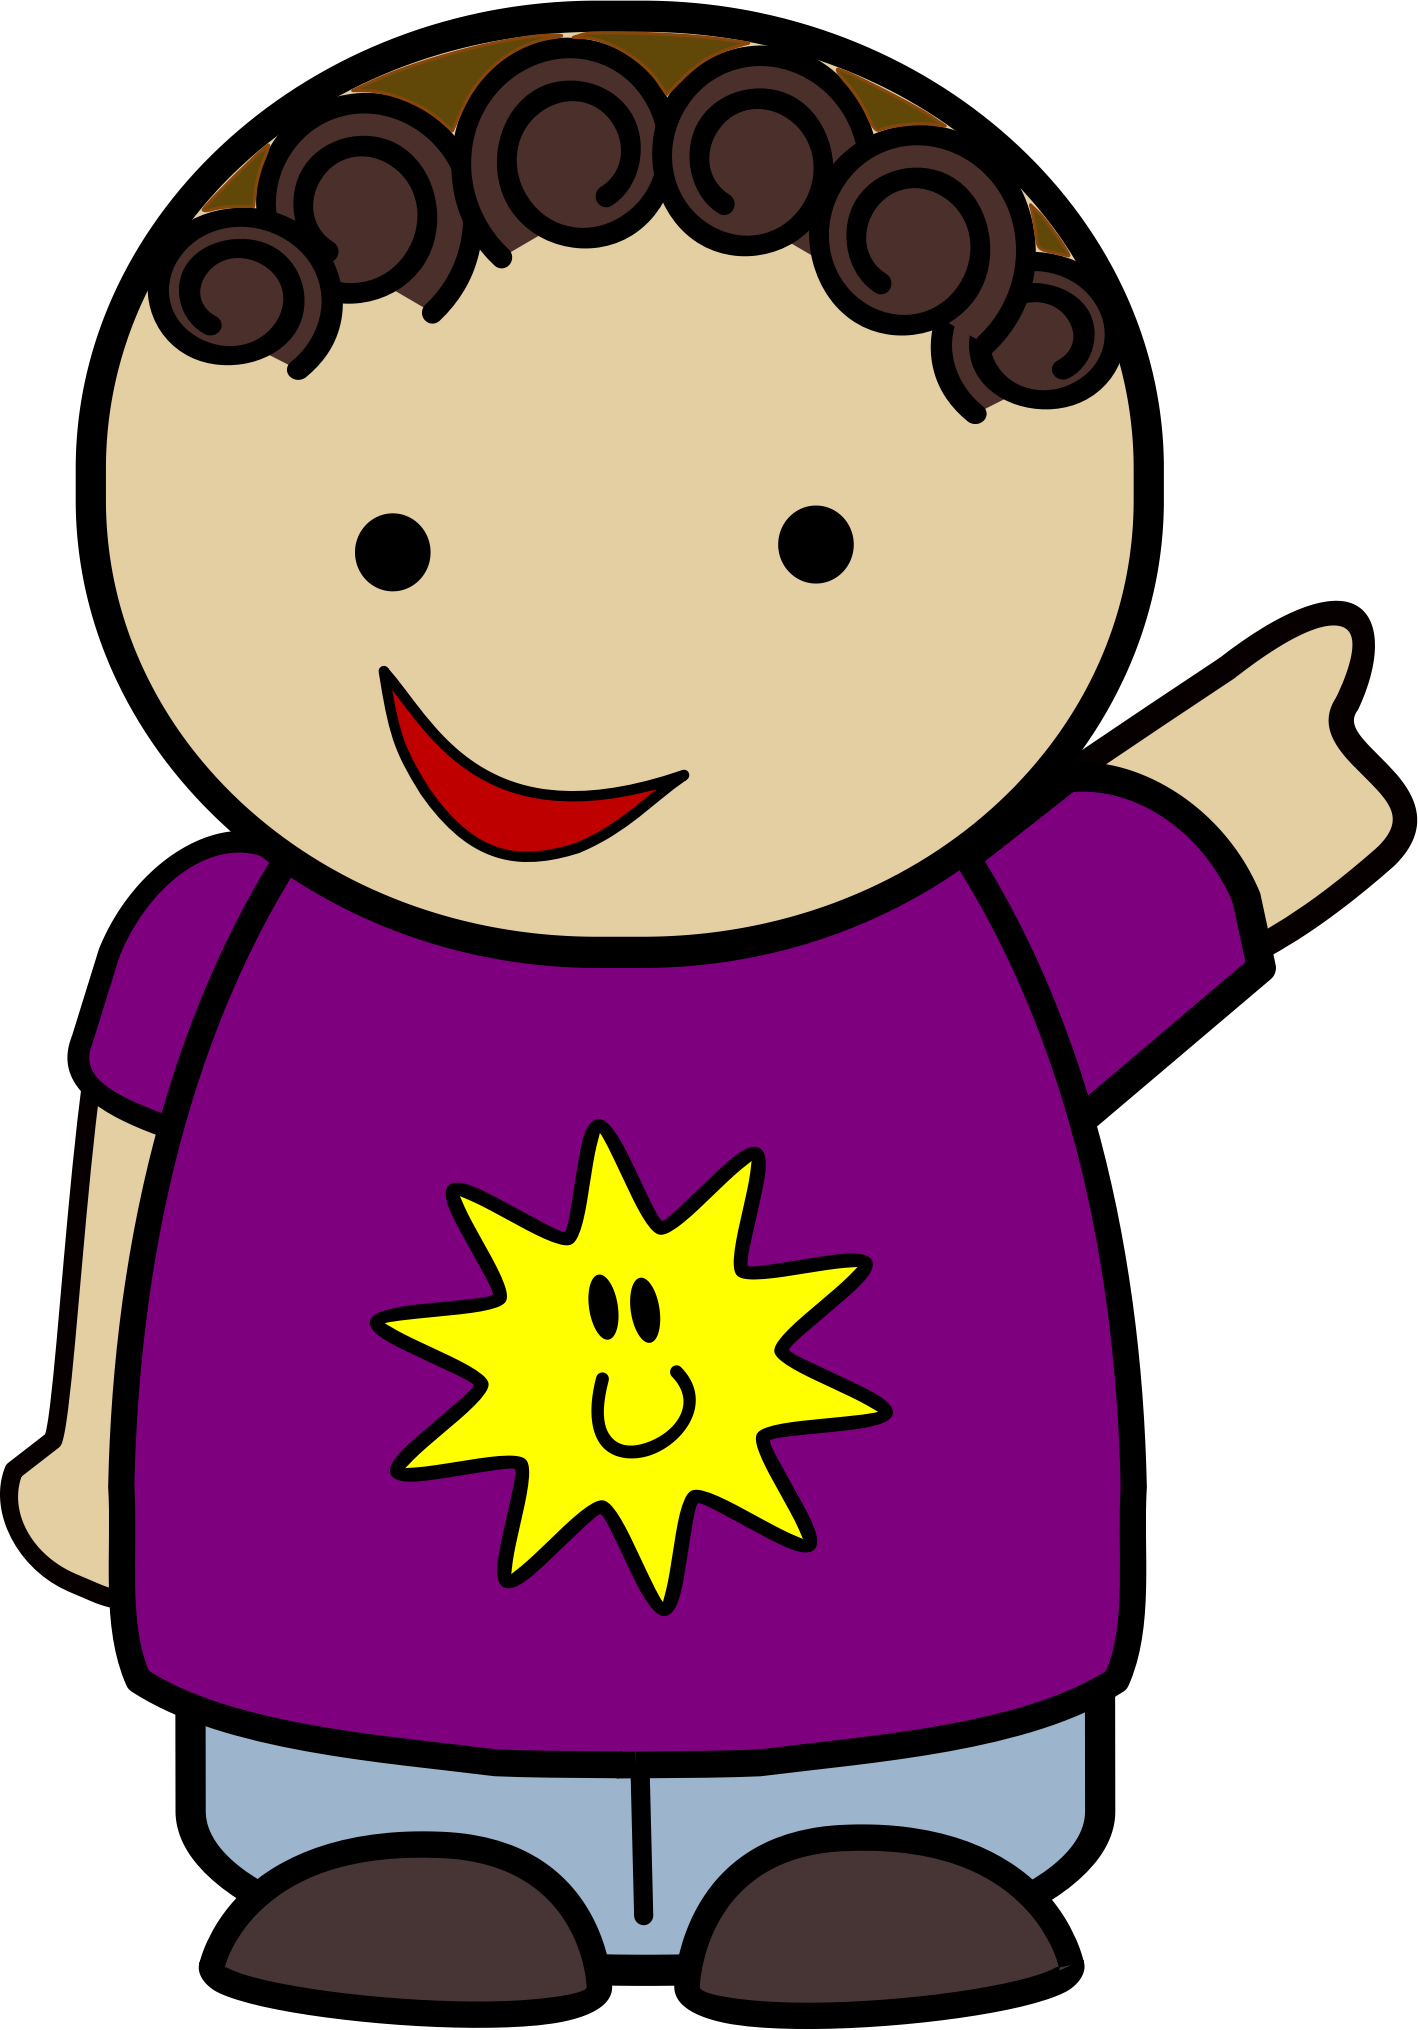 Pointing clipart important event. Boy big image png